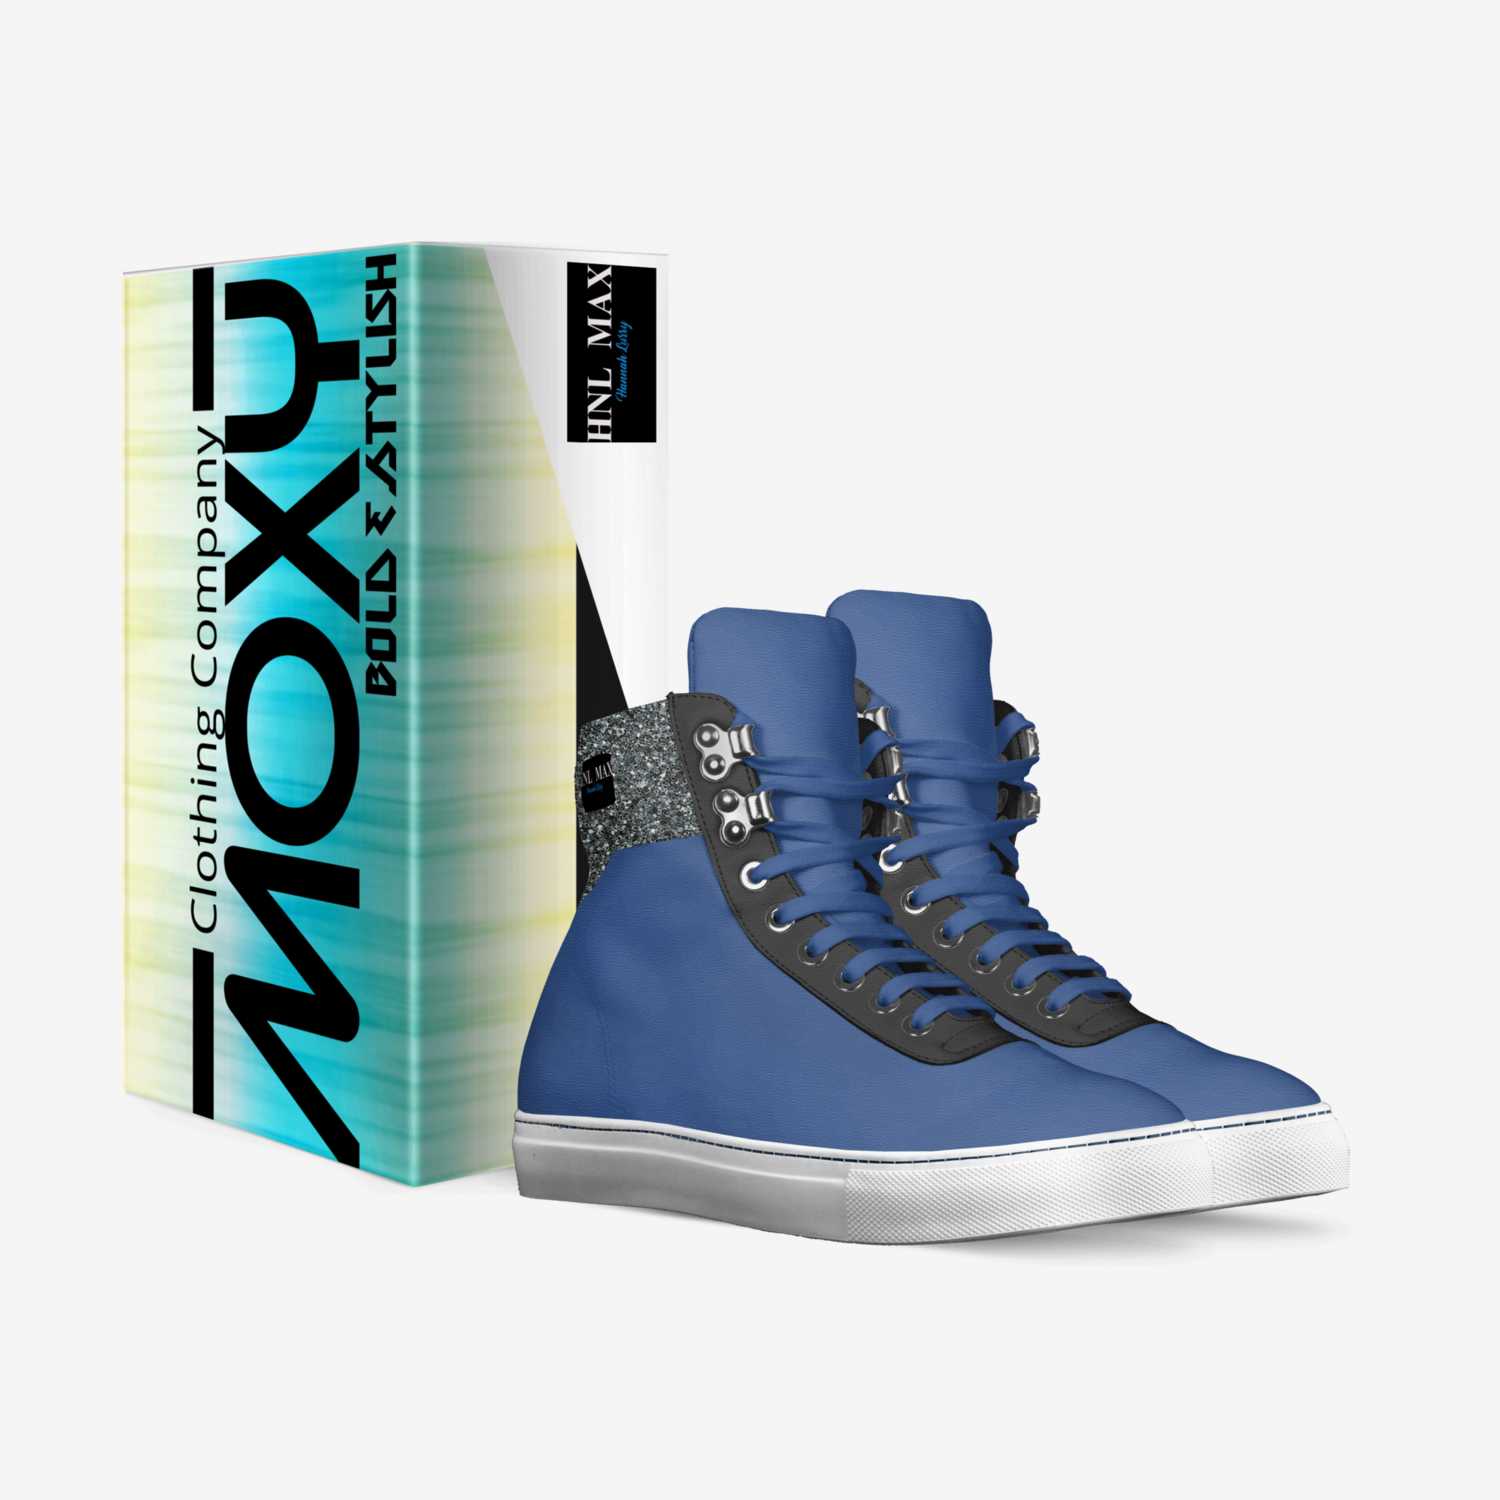 HNL Max custom made in Italy shoes by Moxy Clothing Co. | Box view